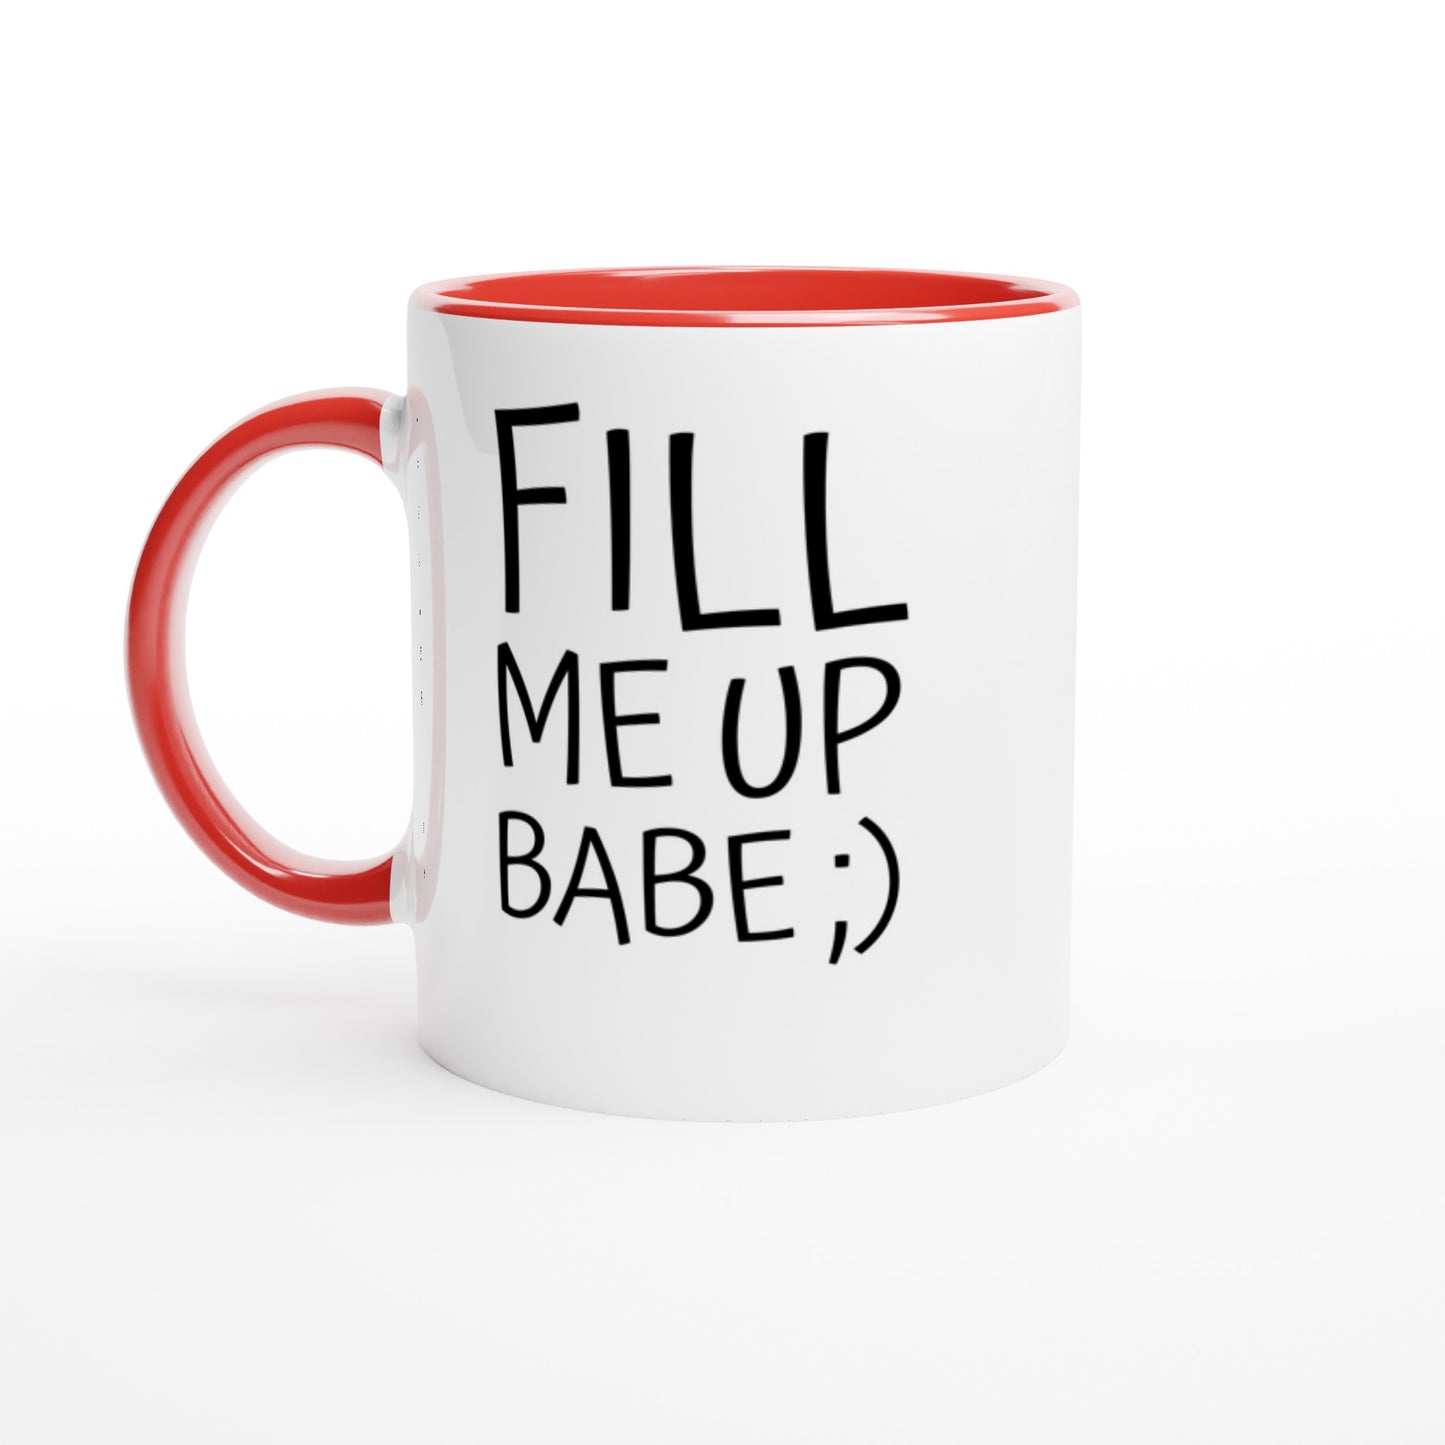 Fill Me Up Babe ;) - Colored